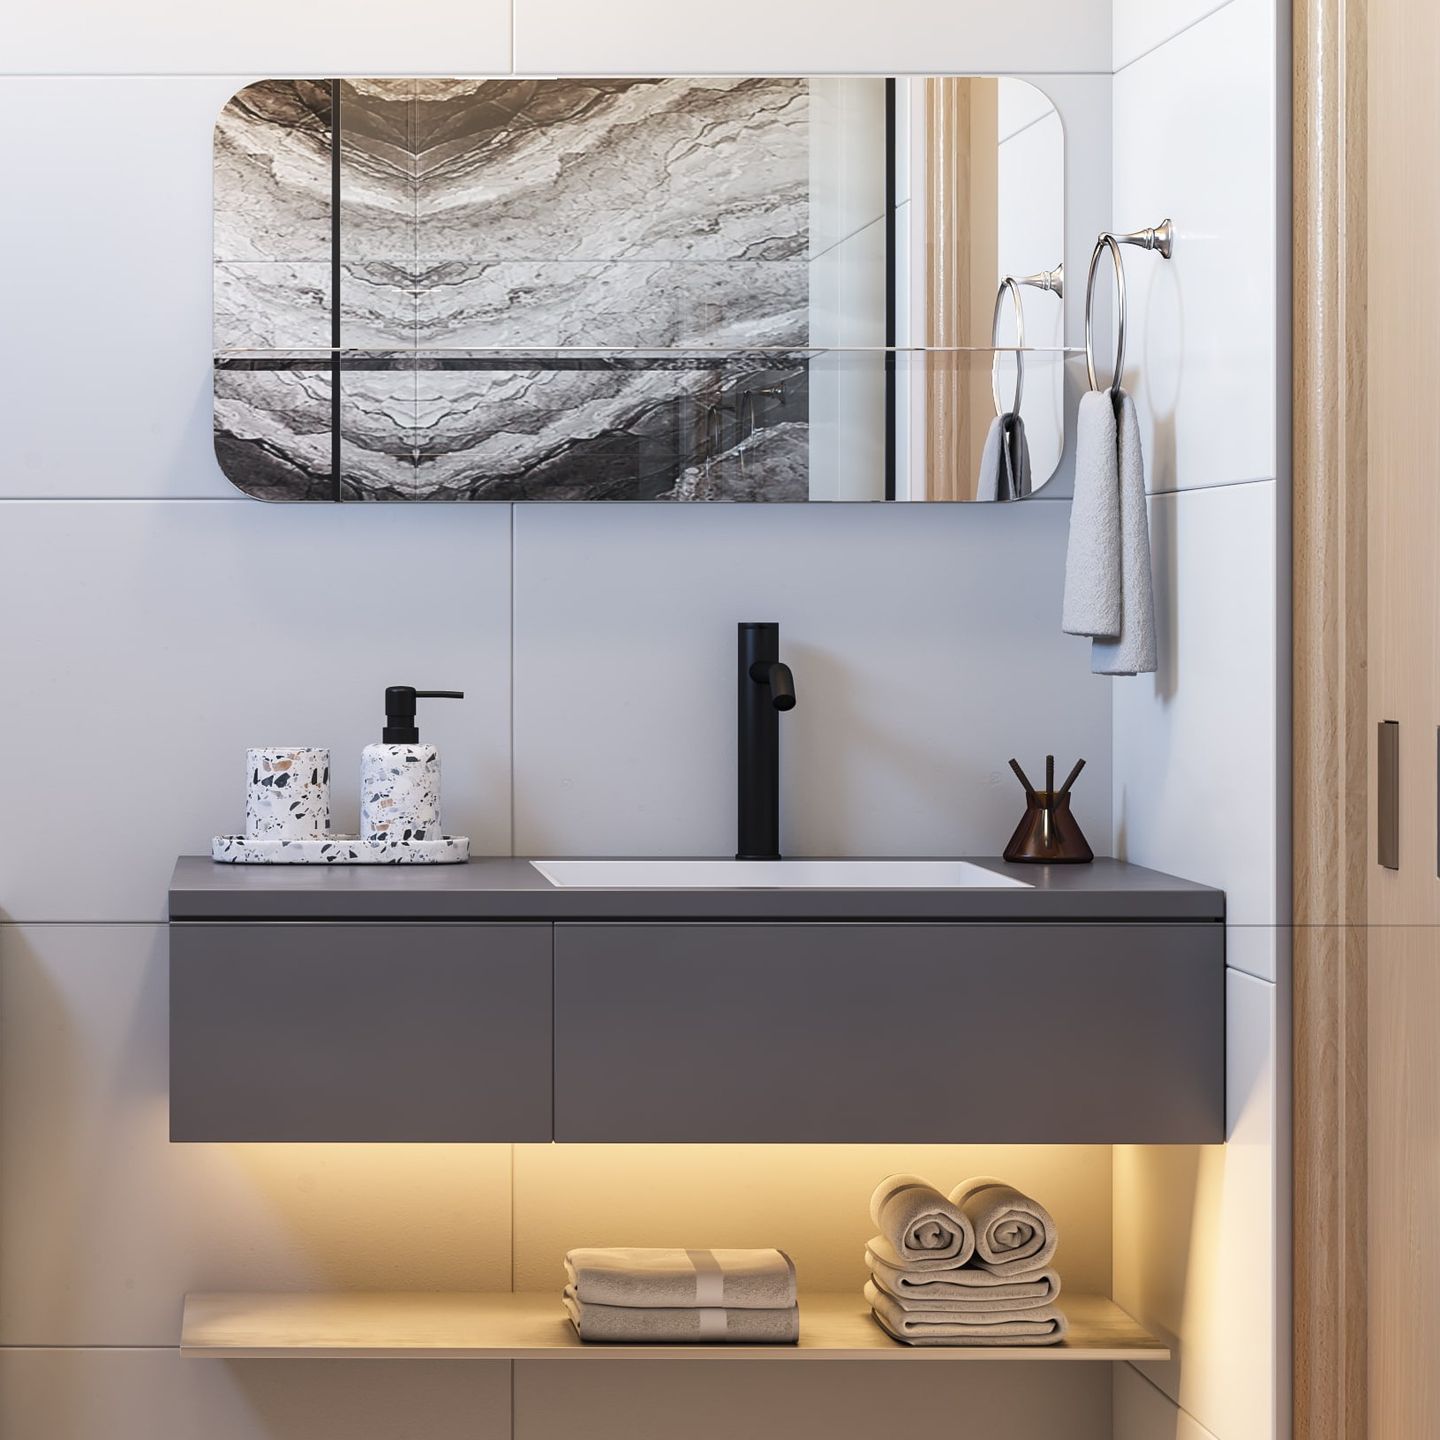 Durable Laminates Design For Vanity Units With A Grey Finish - Livspace